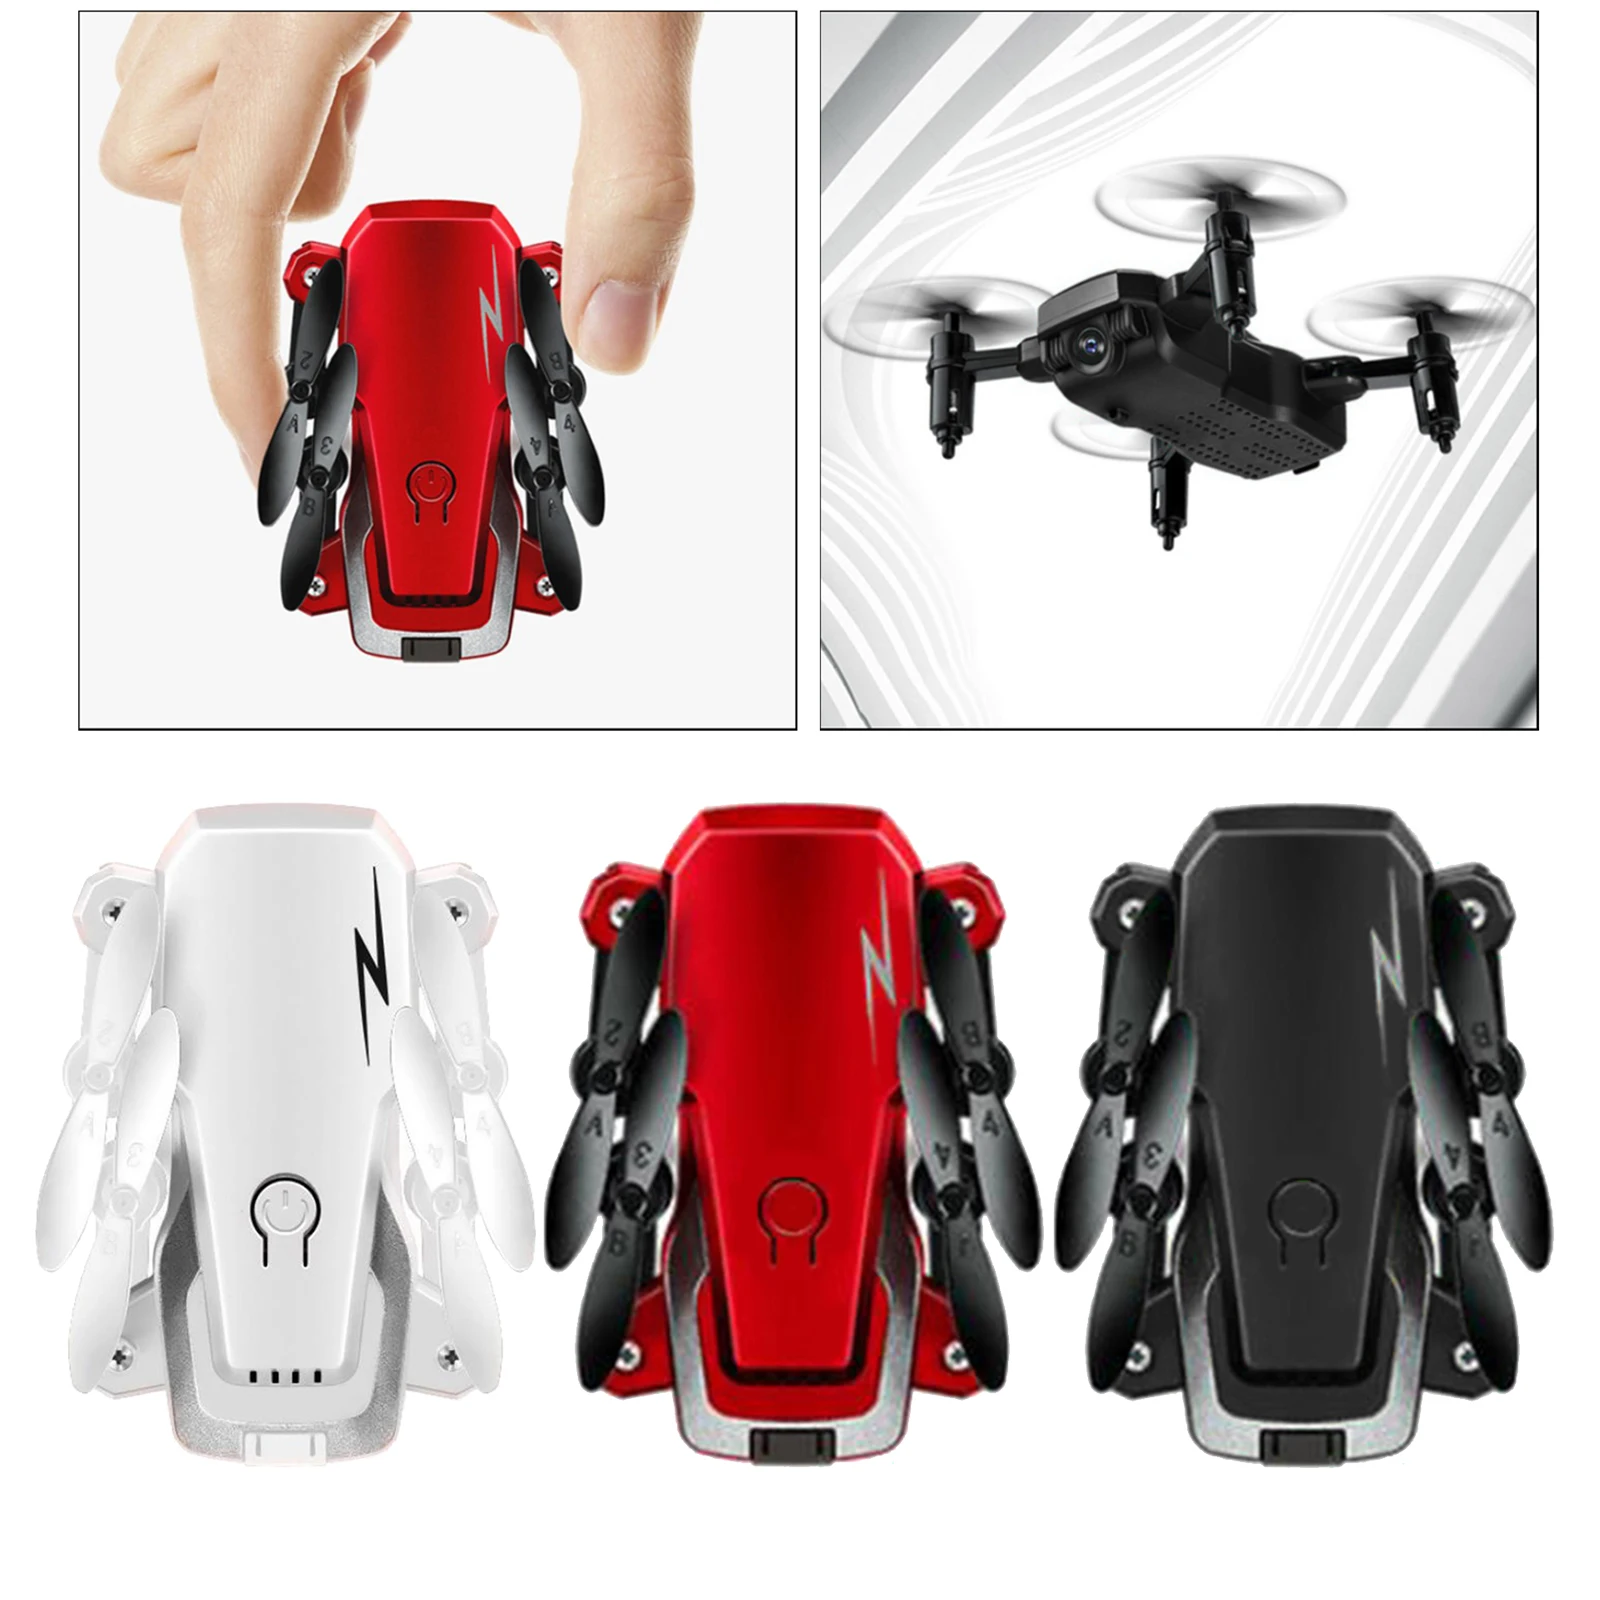 Mini Foldable RC Drone Camera APP FPV Drone Quadcopter Gift for Kids Adults